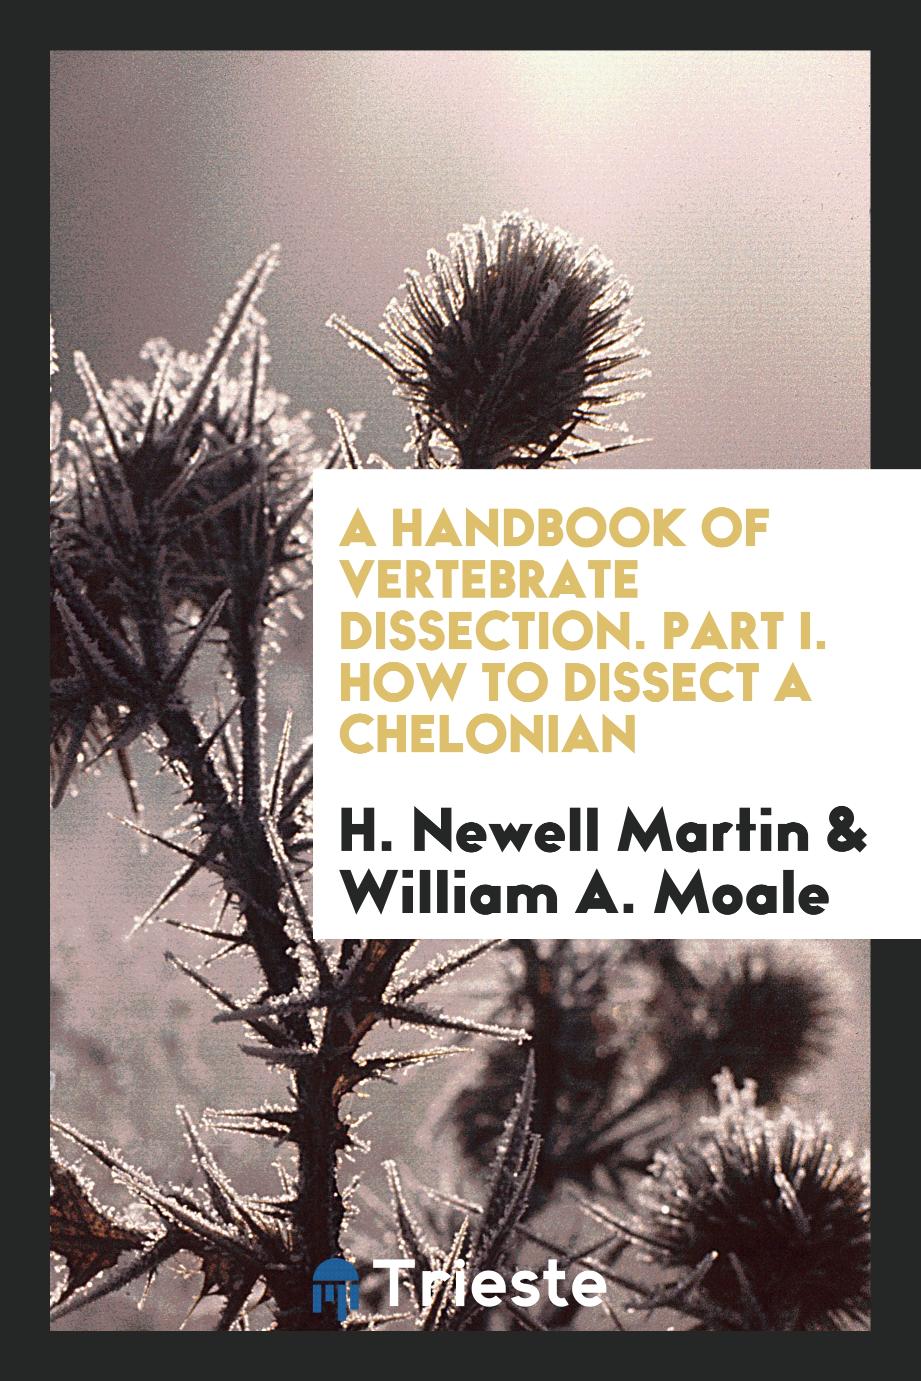 A Handbook of Vertebrate Dissection. Part I. How to Dissect a Chelonian